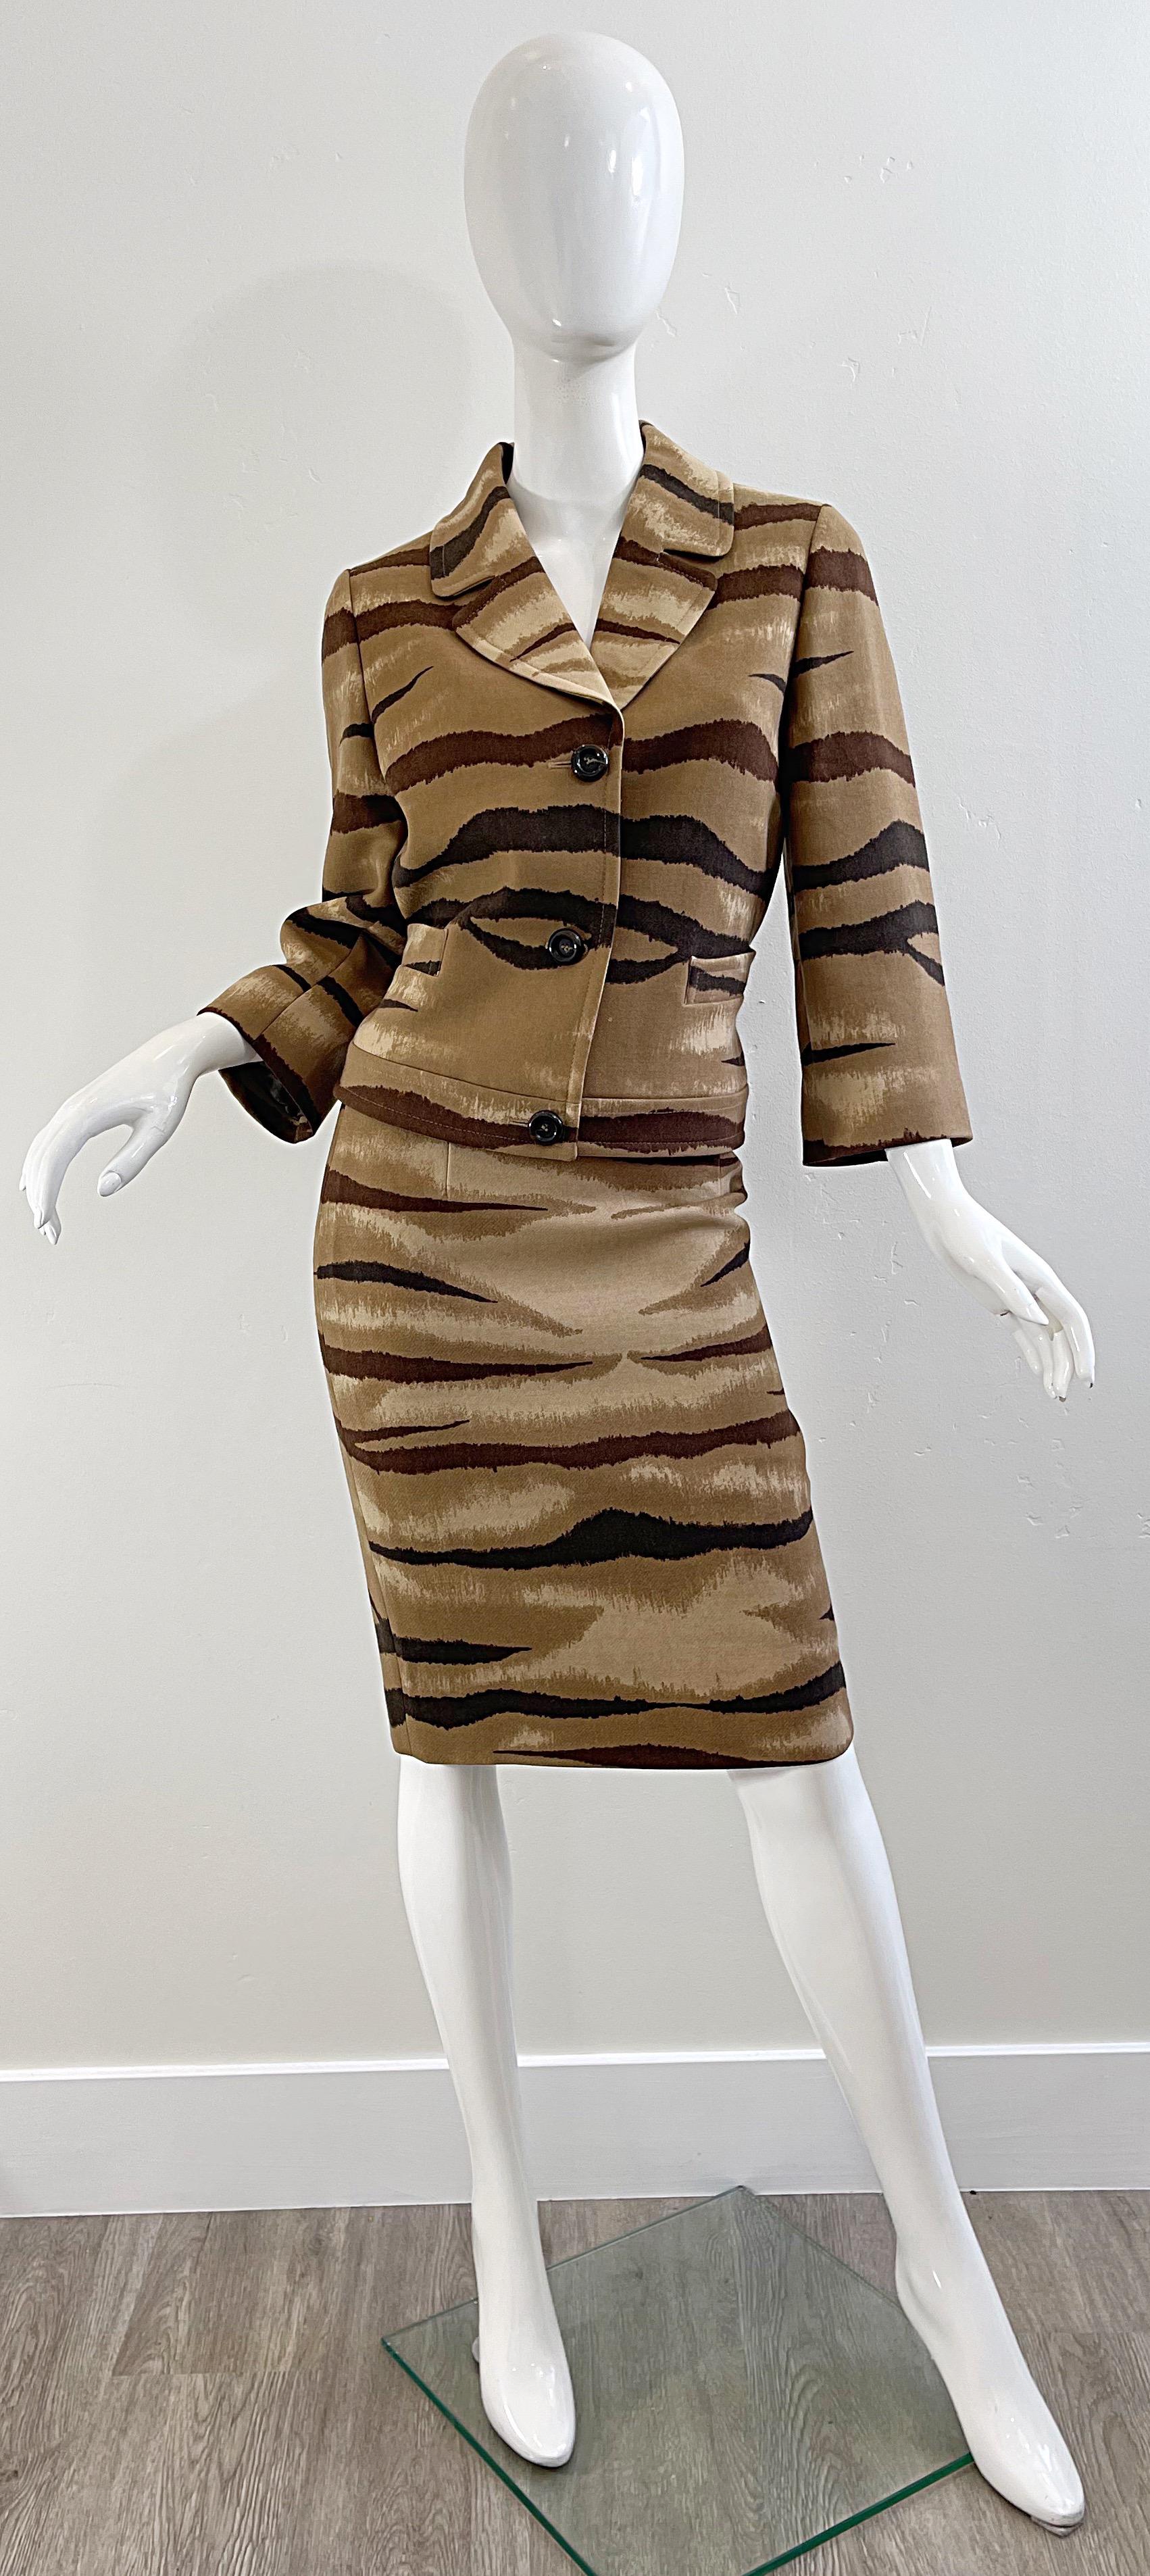 Stylish VALENTINO early 2000s Size 8 tiger / zebra animal print brown, tan and camel lightweight wool skirt suit ! Features a high waisted pencil skirt with hidden zipper up the back. Blazer jacket has a sleek tailored fit with belt strap in the